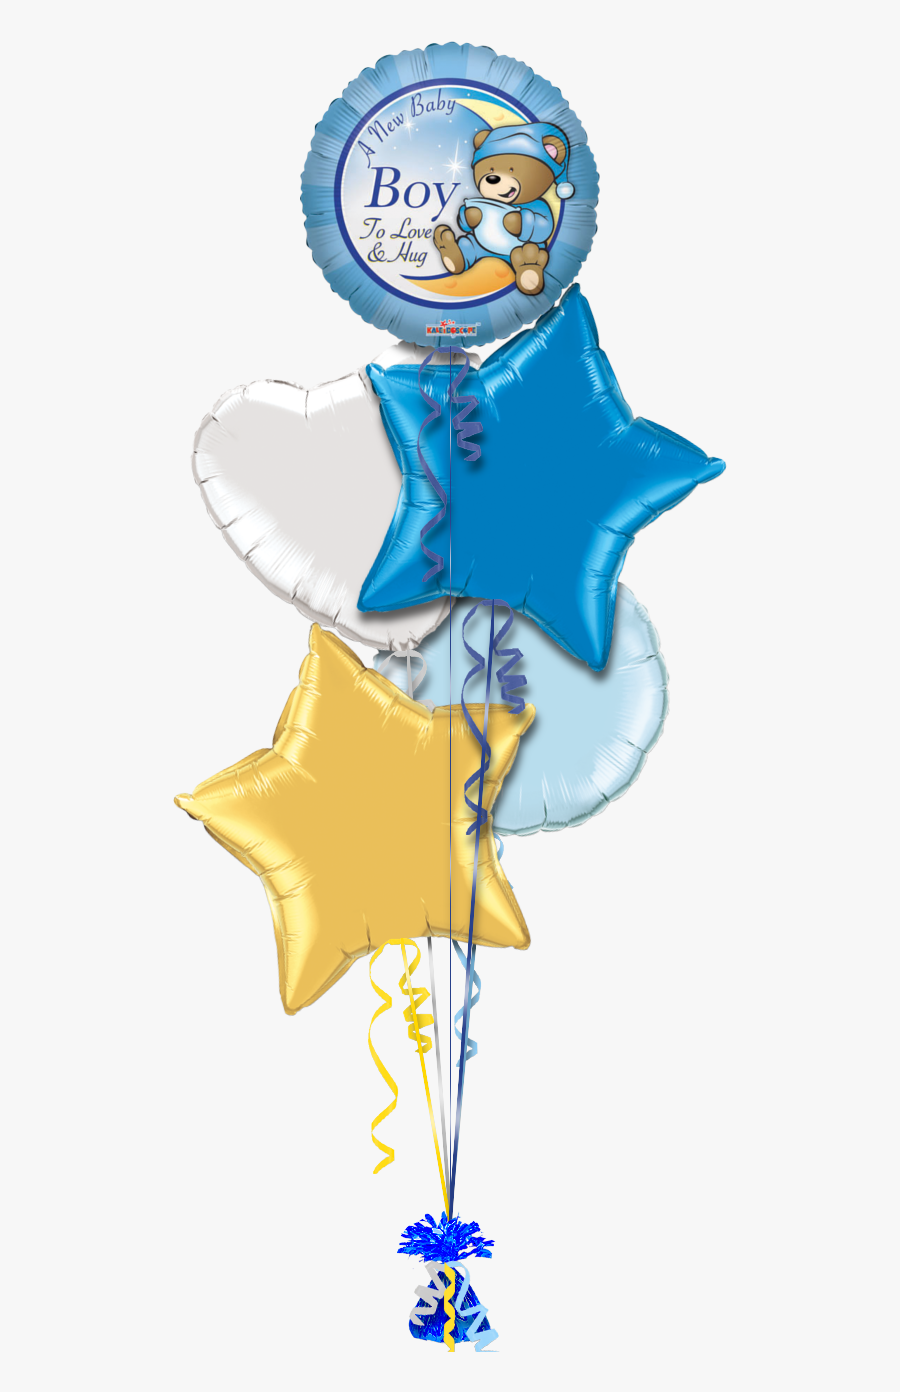 A New Baby Boy To Love And Hug New Baby Balloon - Cartoon, Transparent Clipart